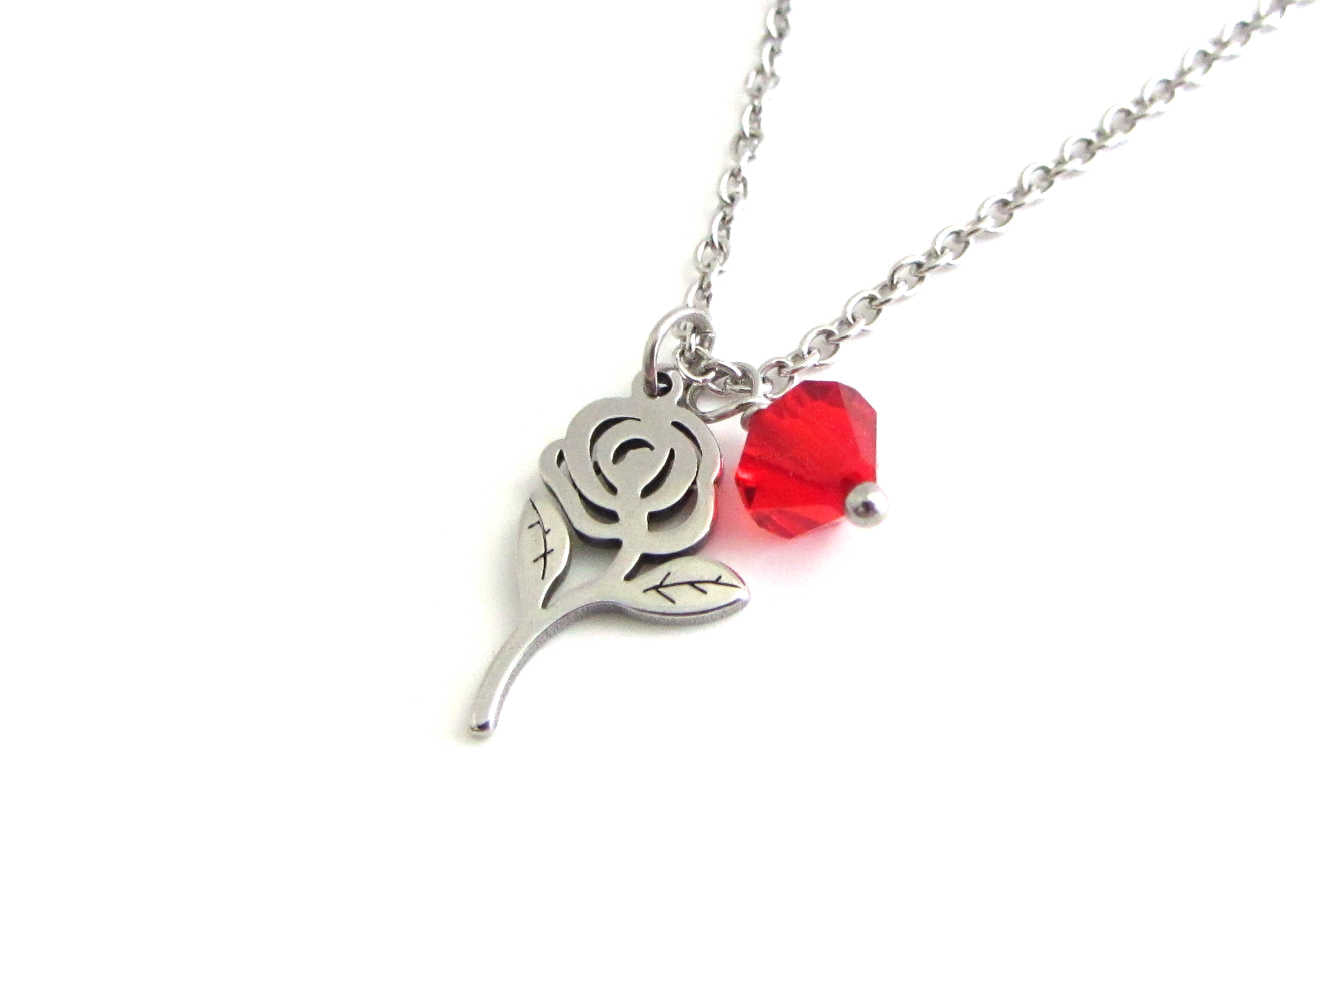 rose flower charm and a red crystal charm on a stainless steel chain